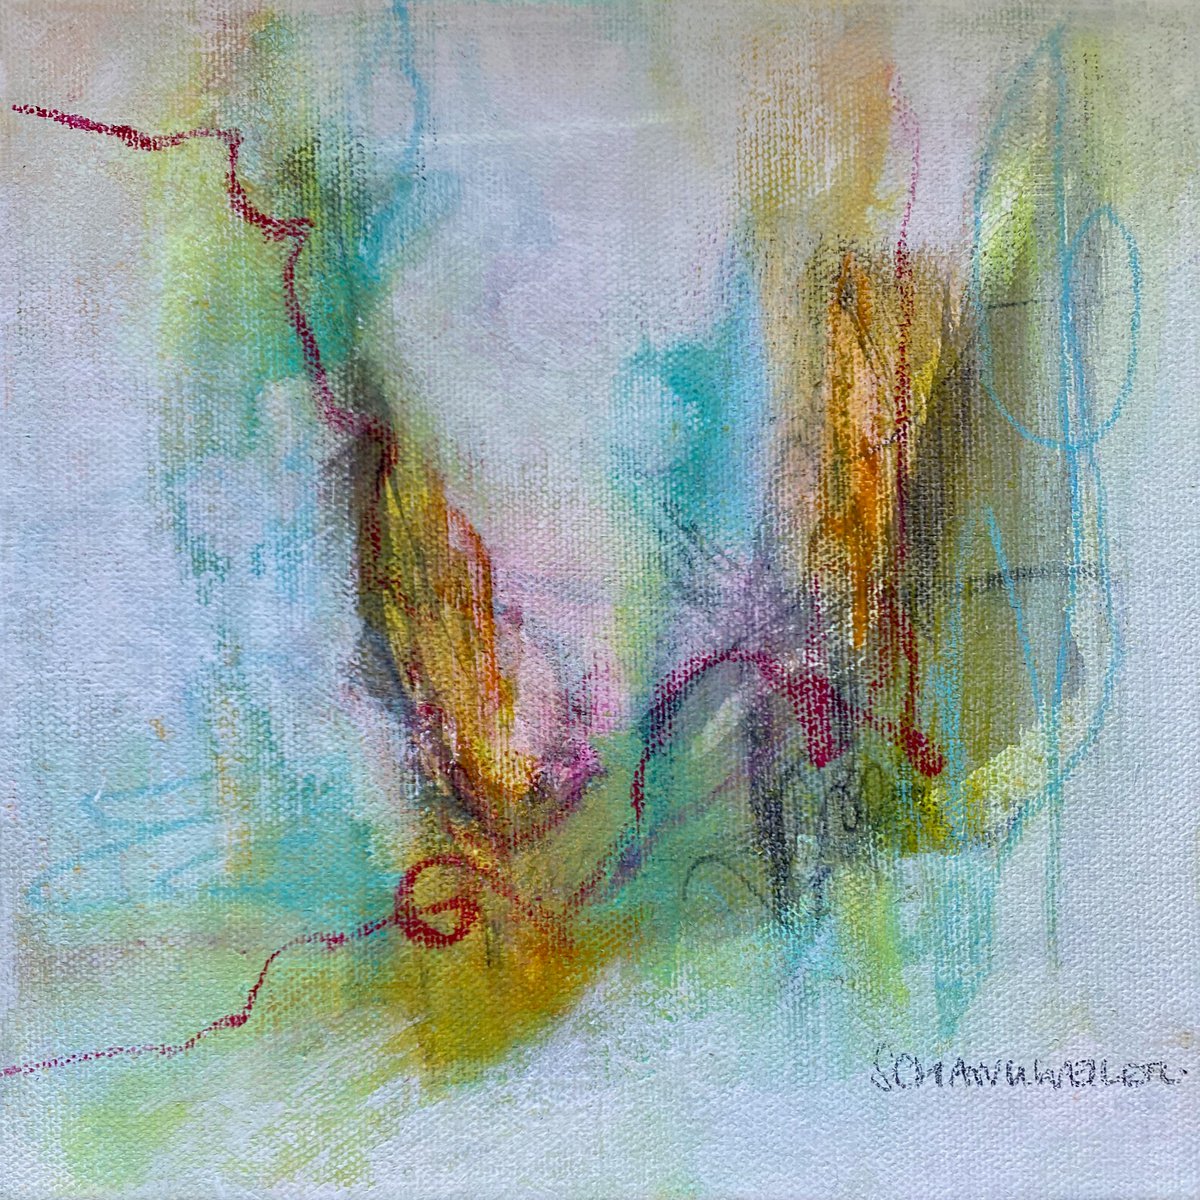 Infinite Confidence #1 I colorful & abstract painting I square by Kirsten Schankweiler